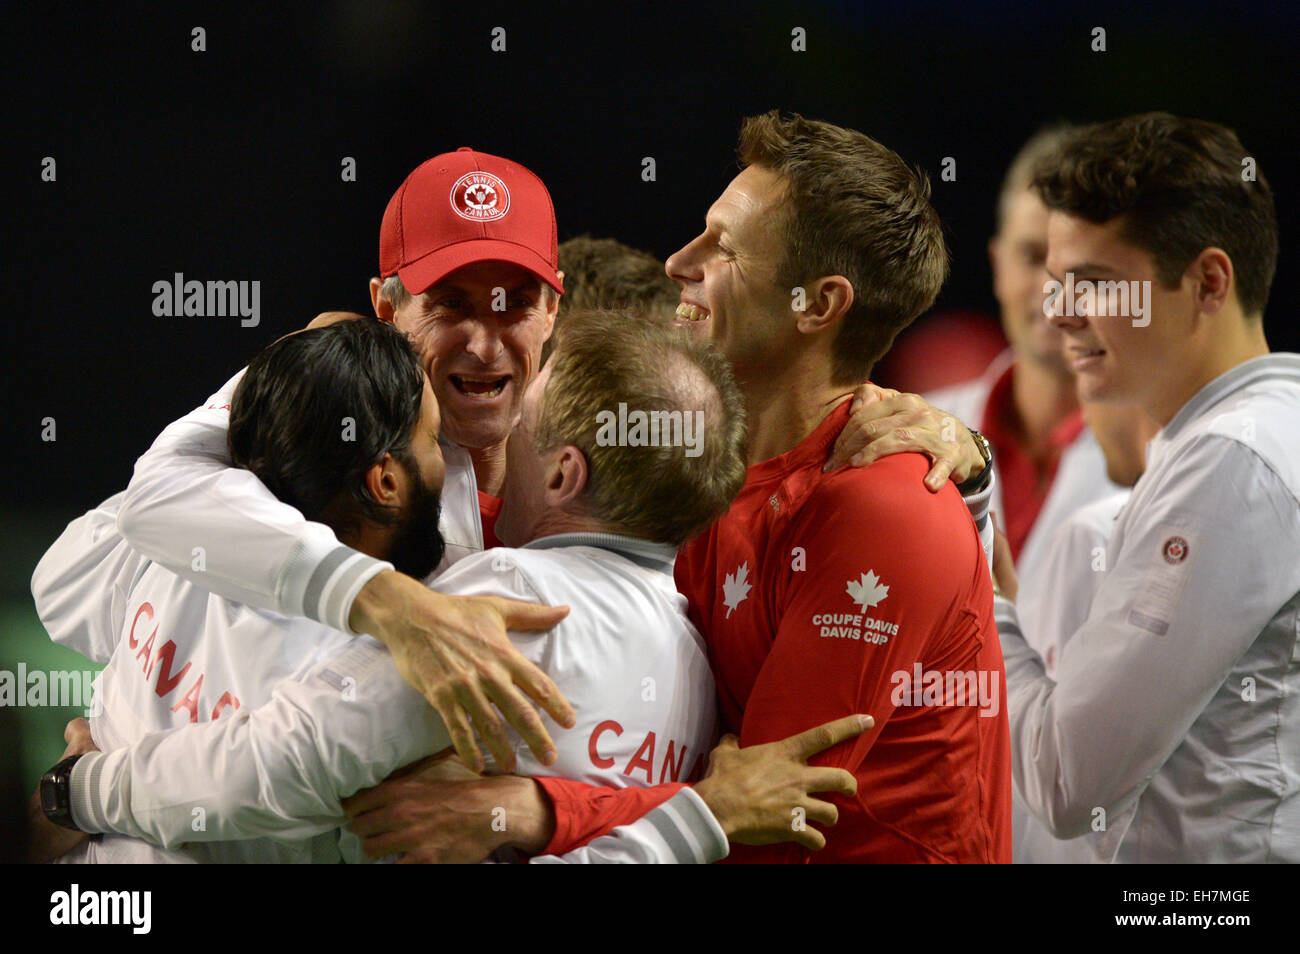 Vancouver, Canada. 8th Mar, 2015. Team Canada celebrates Vasek Pospisil's win over Japan's Go Soeda during Davis Cup tennis tournament in Vancouver, Canada, March 8, 2015. Pospisil defeated Saeda in straight sets 3-0 and advanced Canada to the quarter-finals of Davis Cup. Credit:  Sergei Bachlakov/Xinhua/Alamy Live News Stock Photo